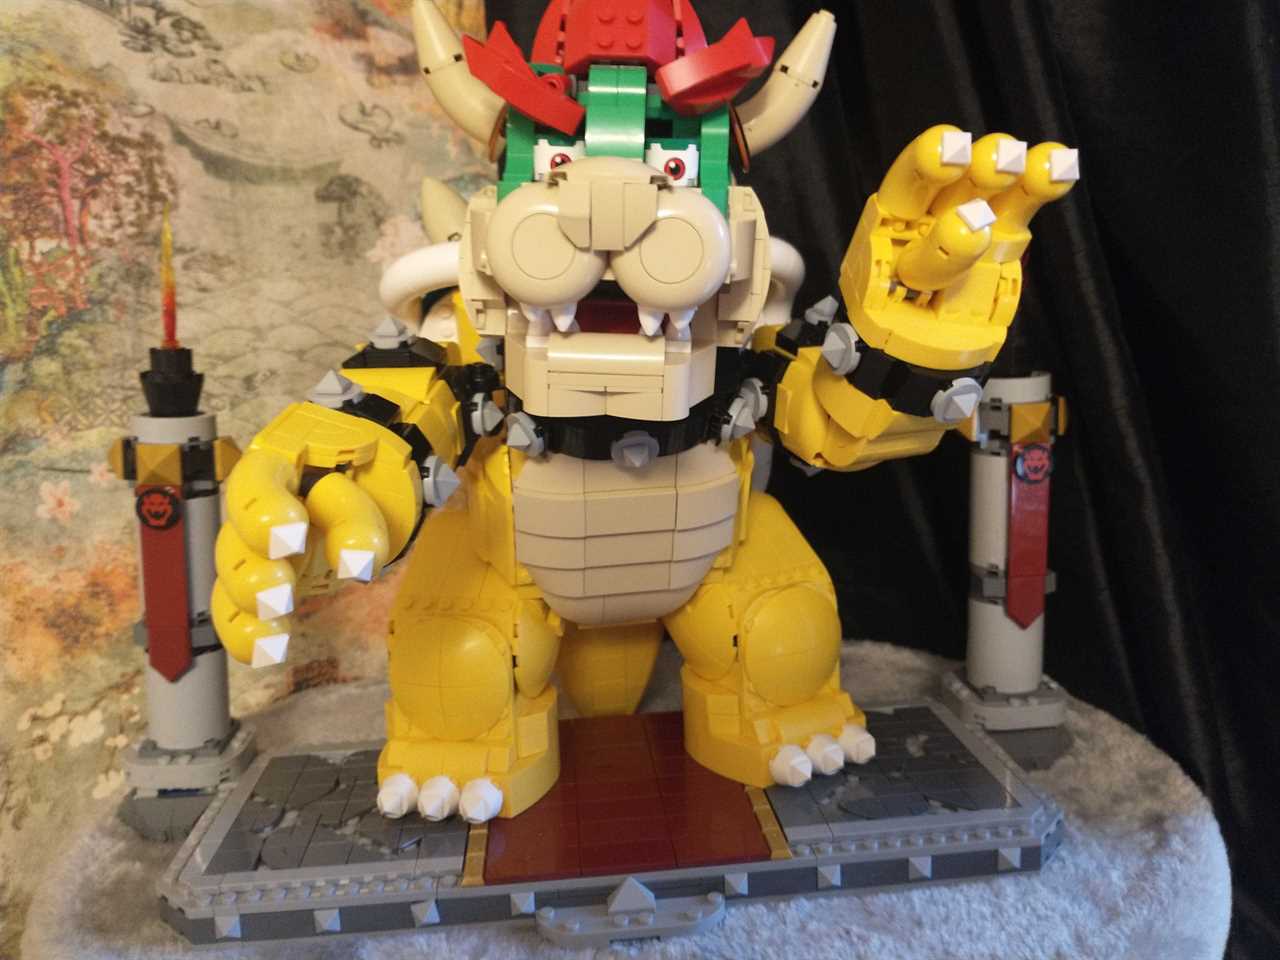 Lego Super Mario The Mighty Bowser review: Bonding building for you and a buddy